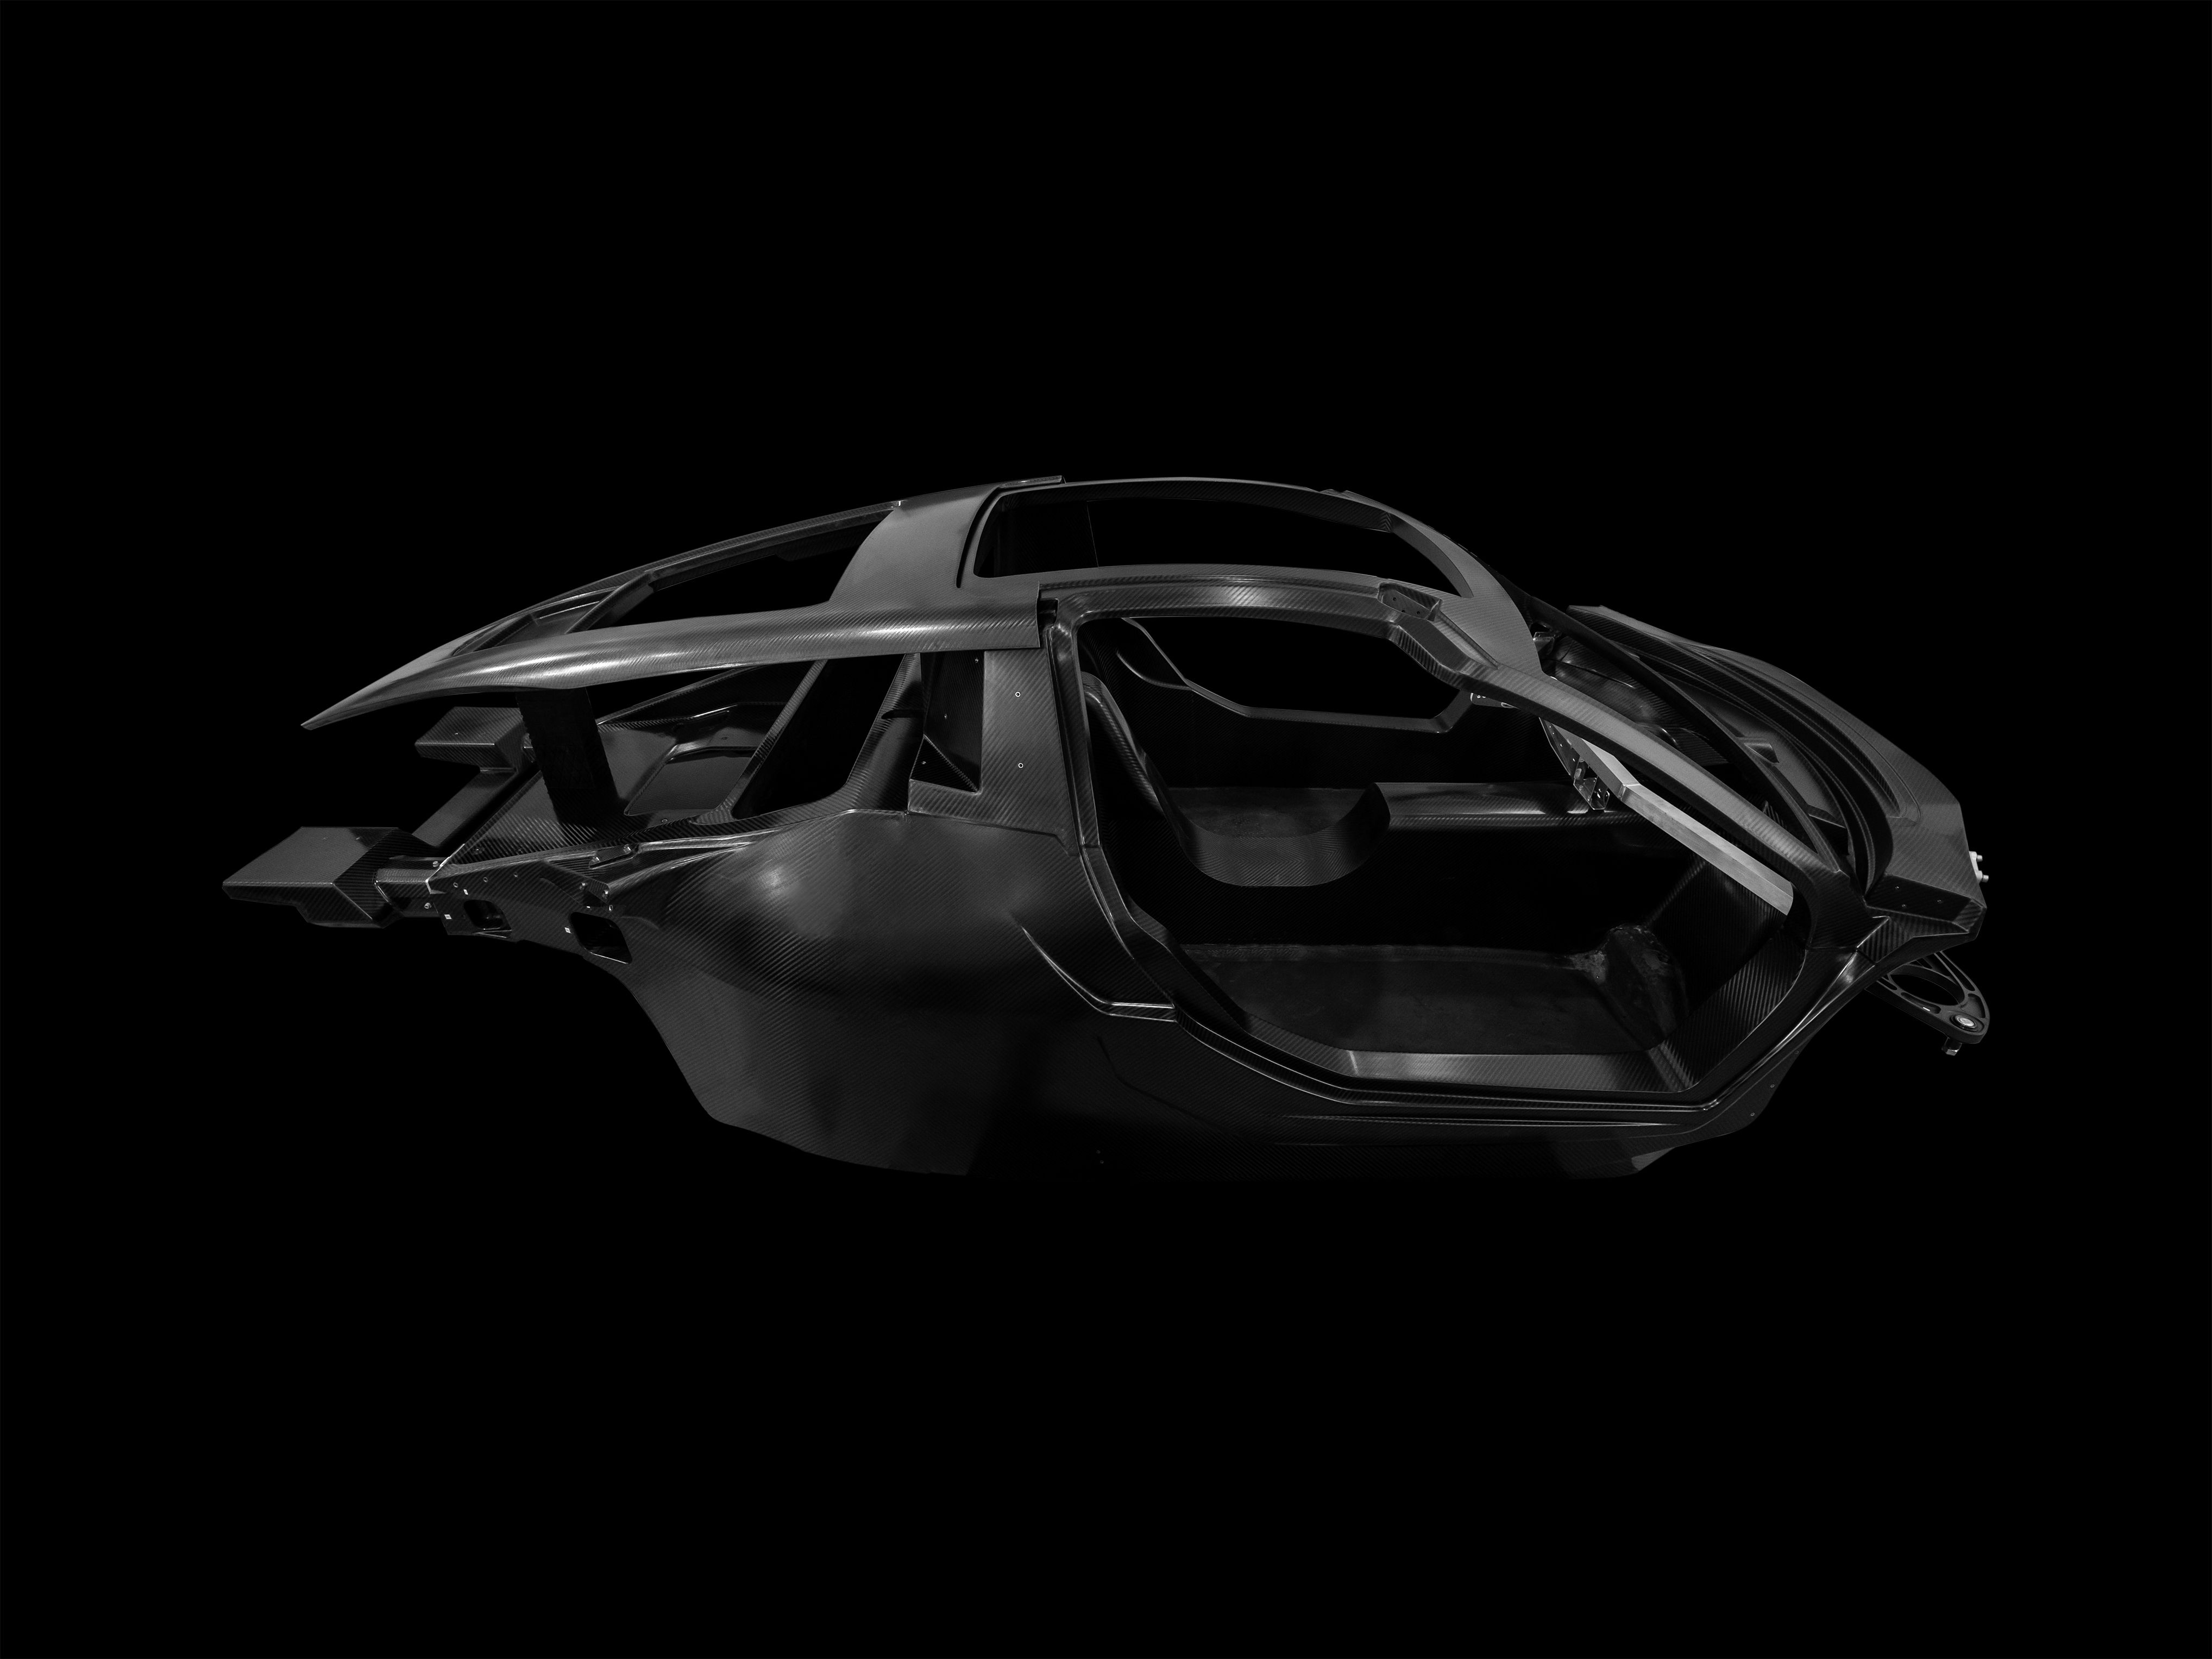 2020 Here's The Latest Teaser for the Hispano-Suiza Carmen EV That'll Debut at the 2019 Geneva Motor Show